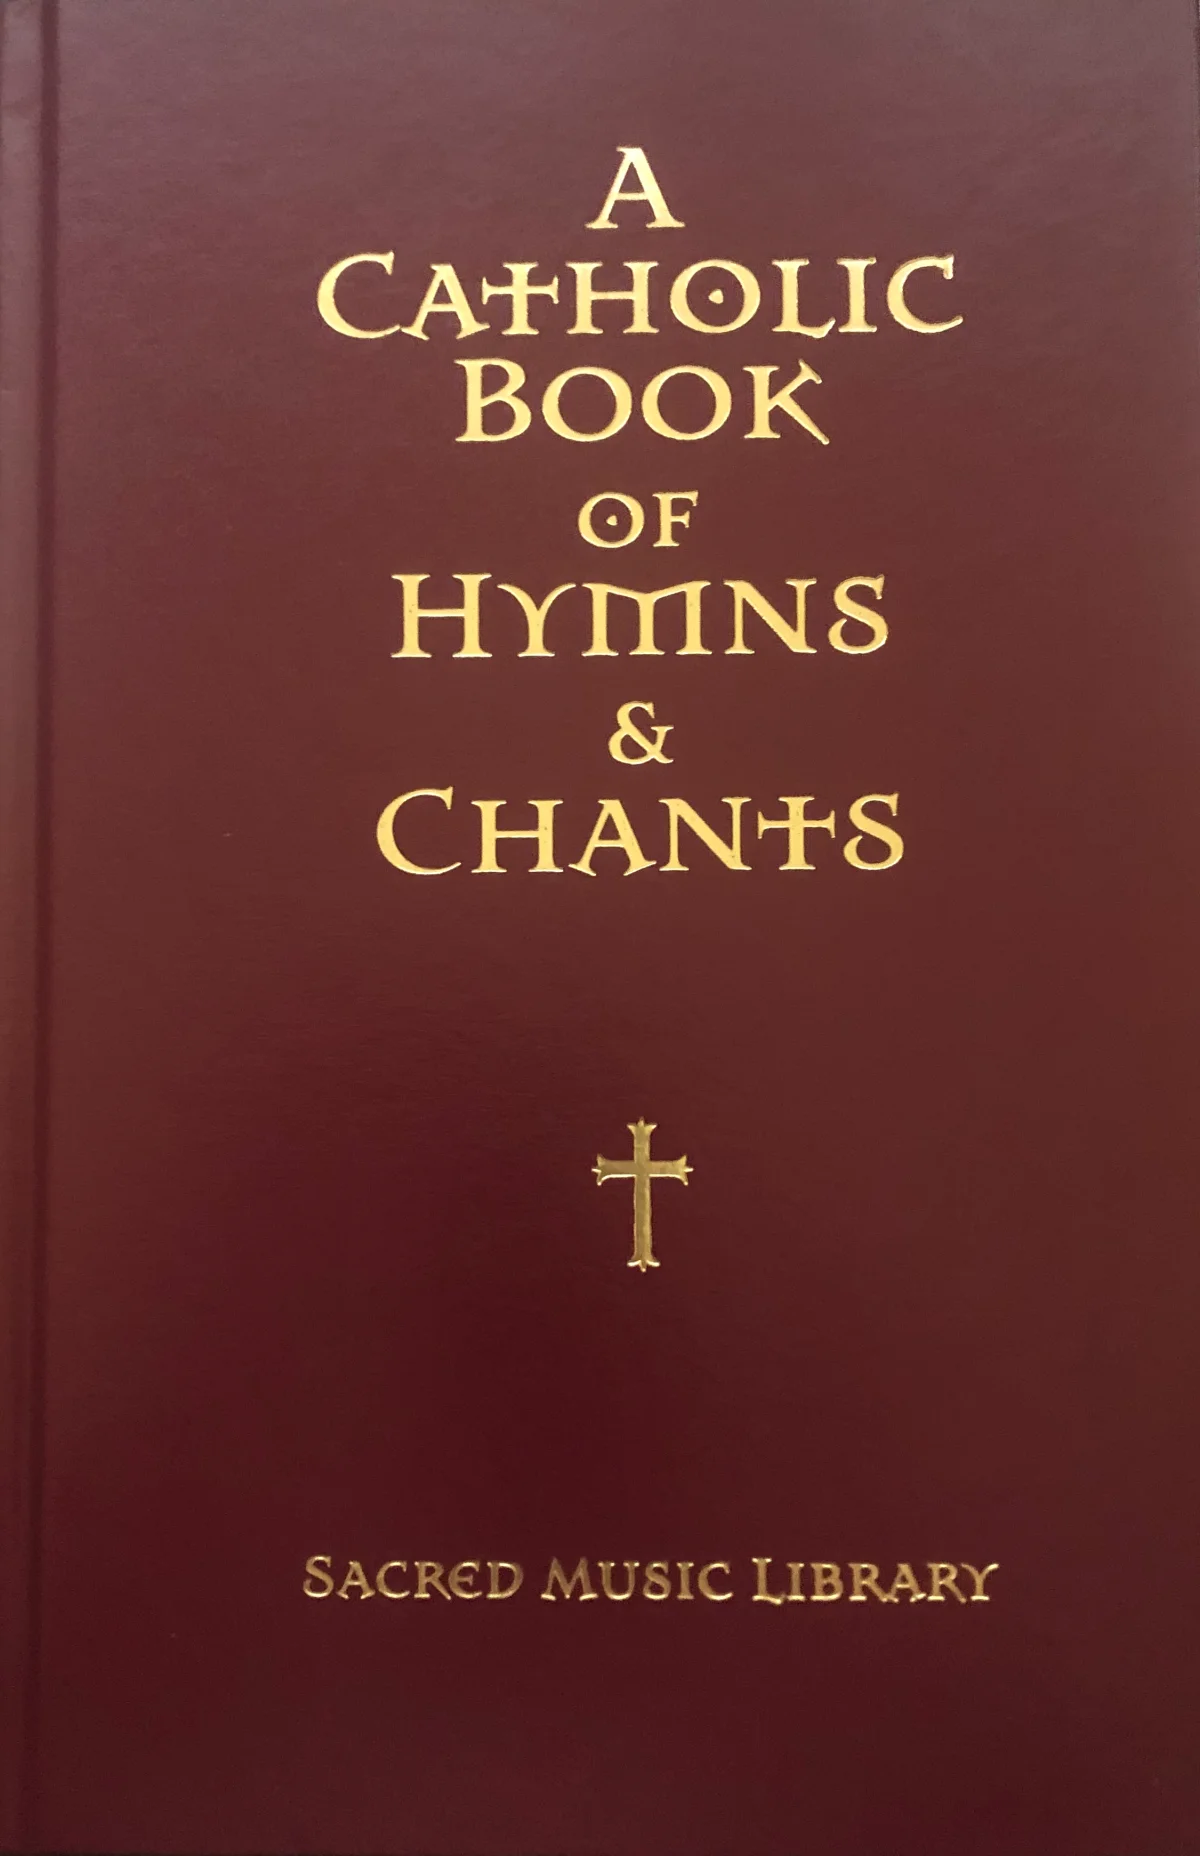 A Catholic Book of Hymns and Chants by Sacred Music Library